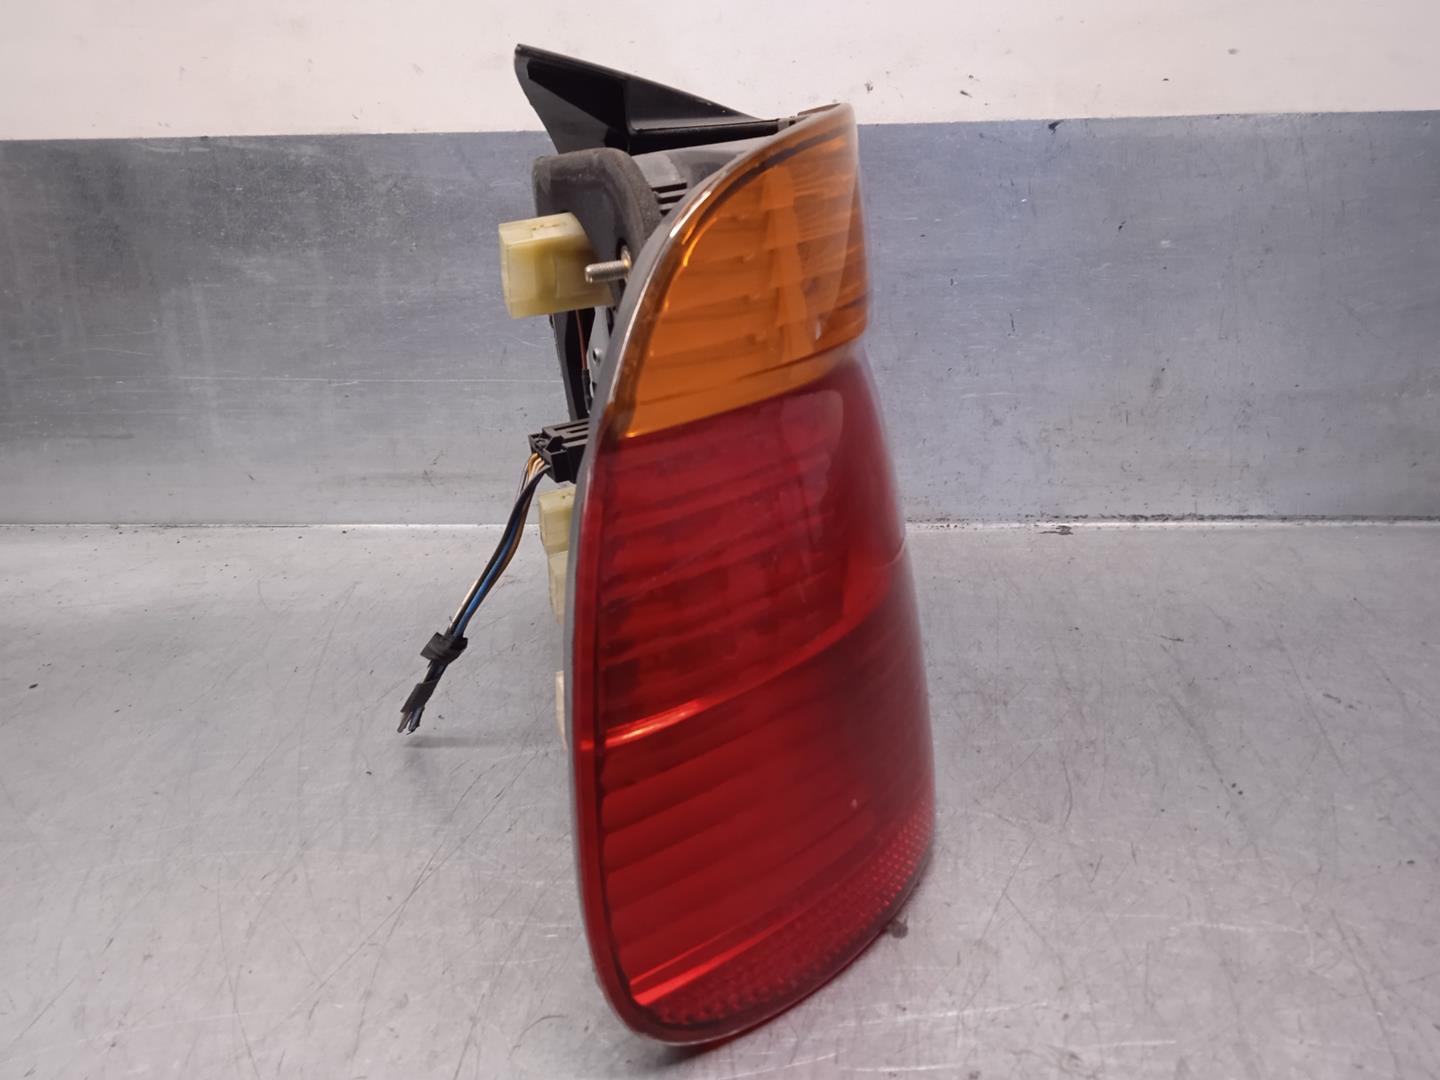 BMW 5 Series E39 (1995-2004) Rear Left Taillight 63216900209, 6PINES, 4PUERTAS 19877979